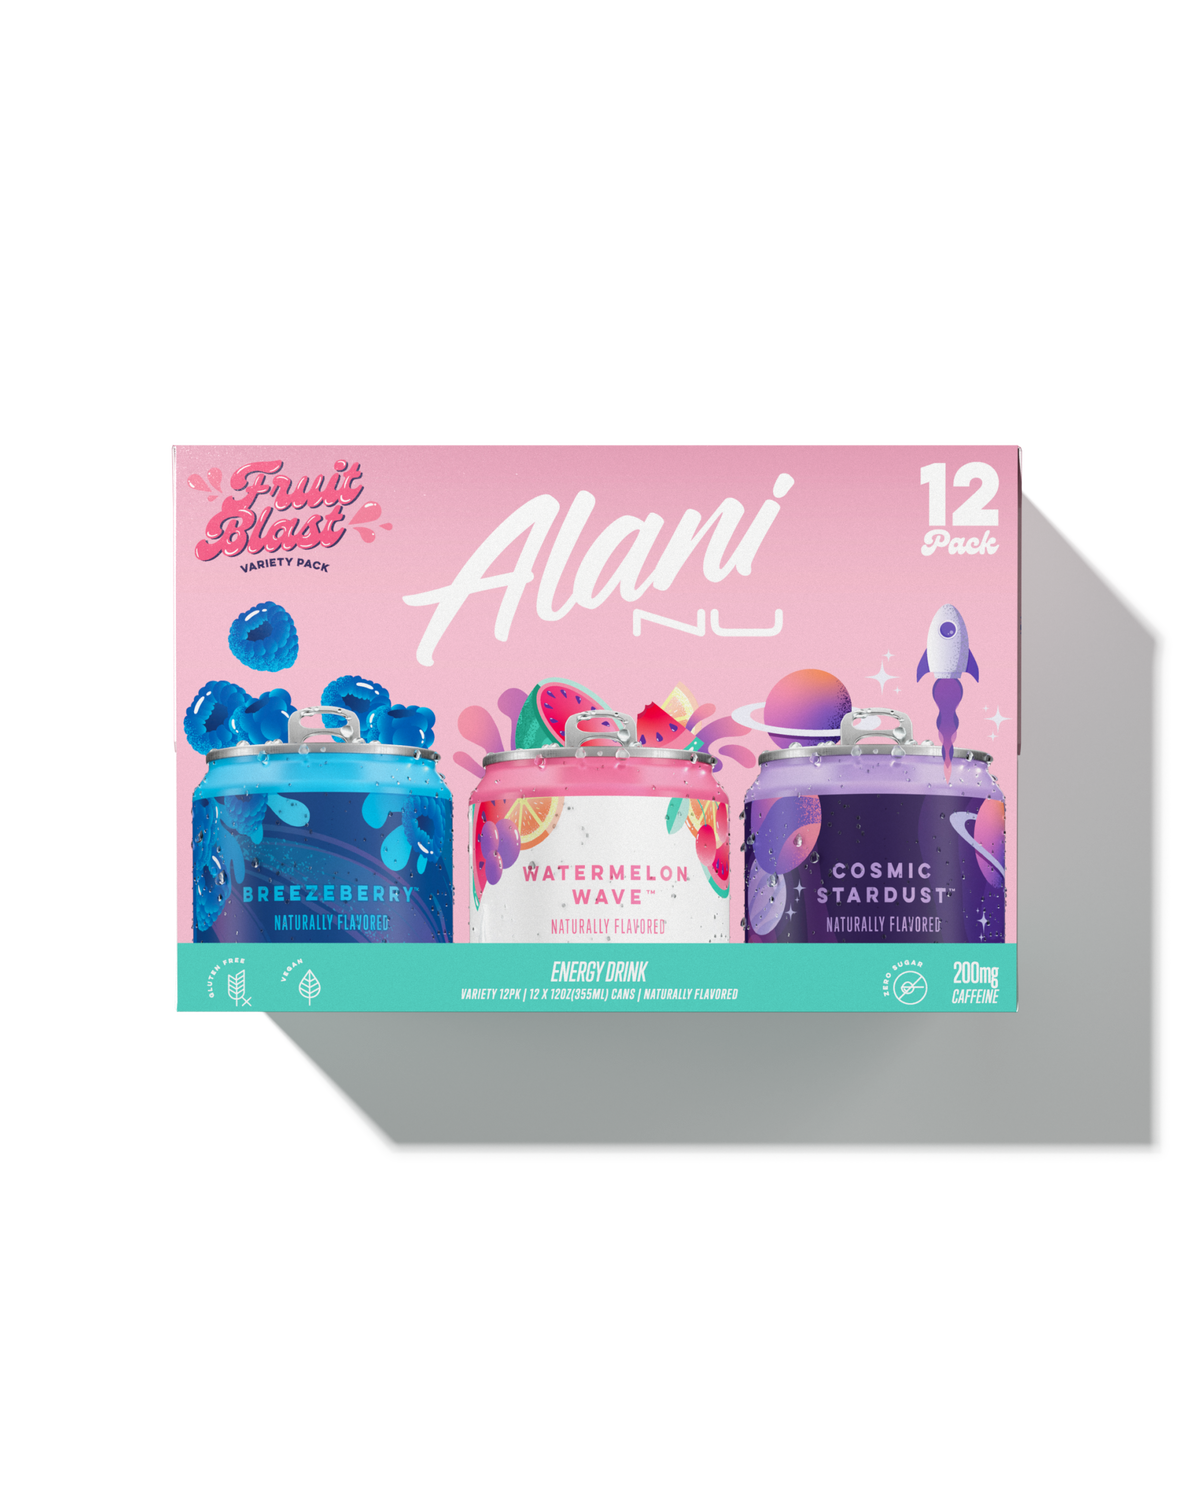 12 pack box of three cans of Alani Nu Energy Drink in Fruit Blast flavor.